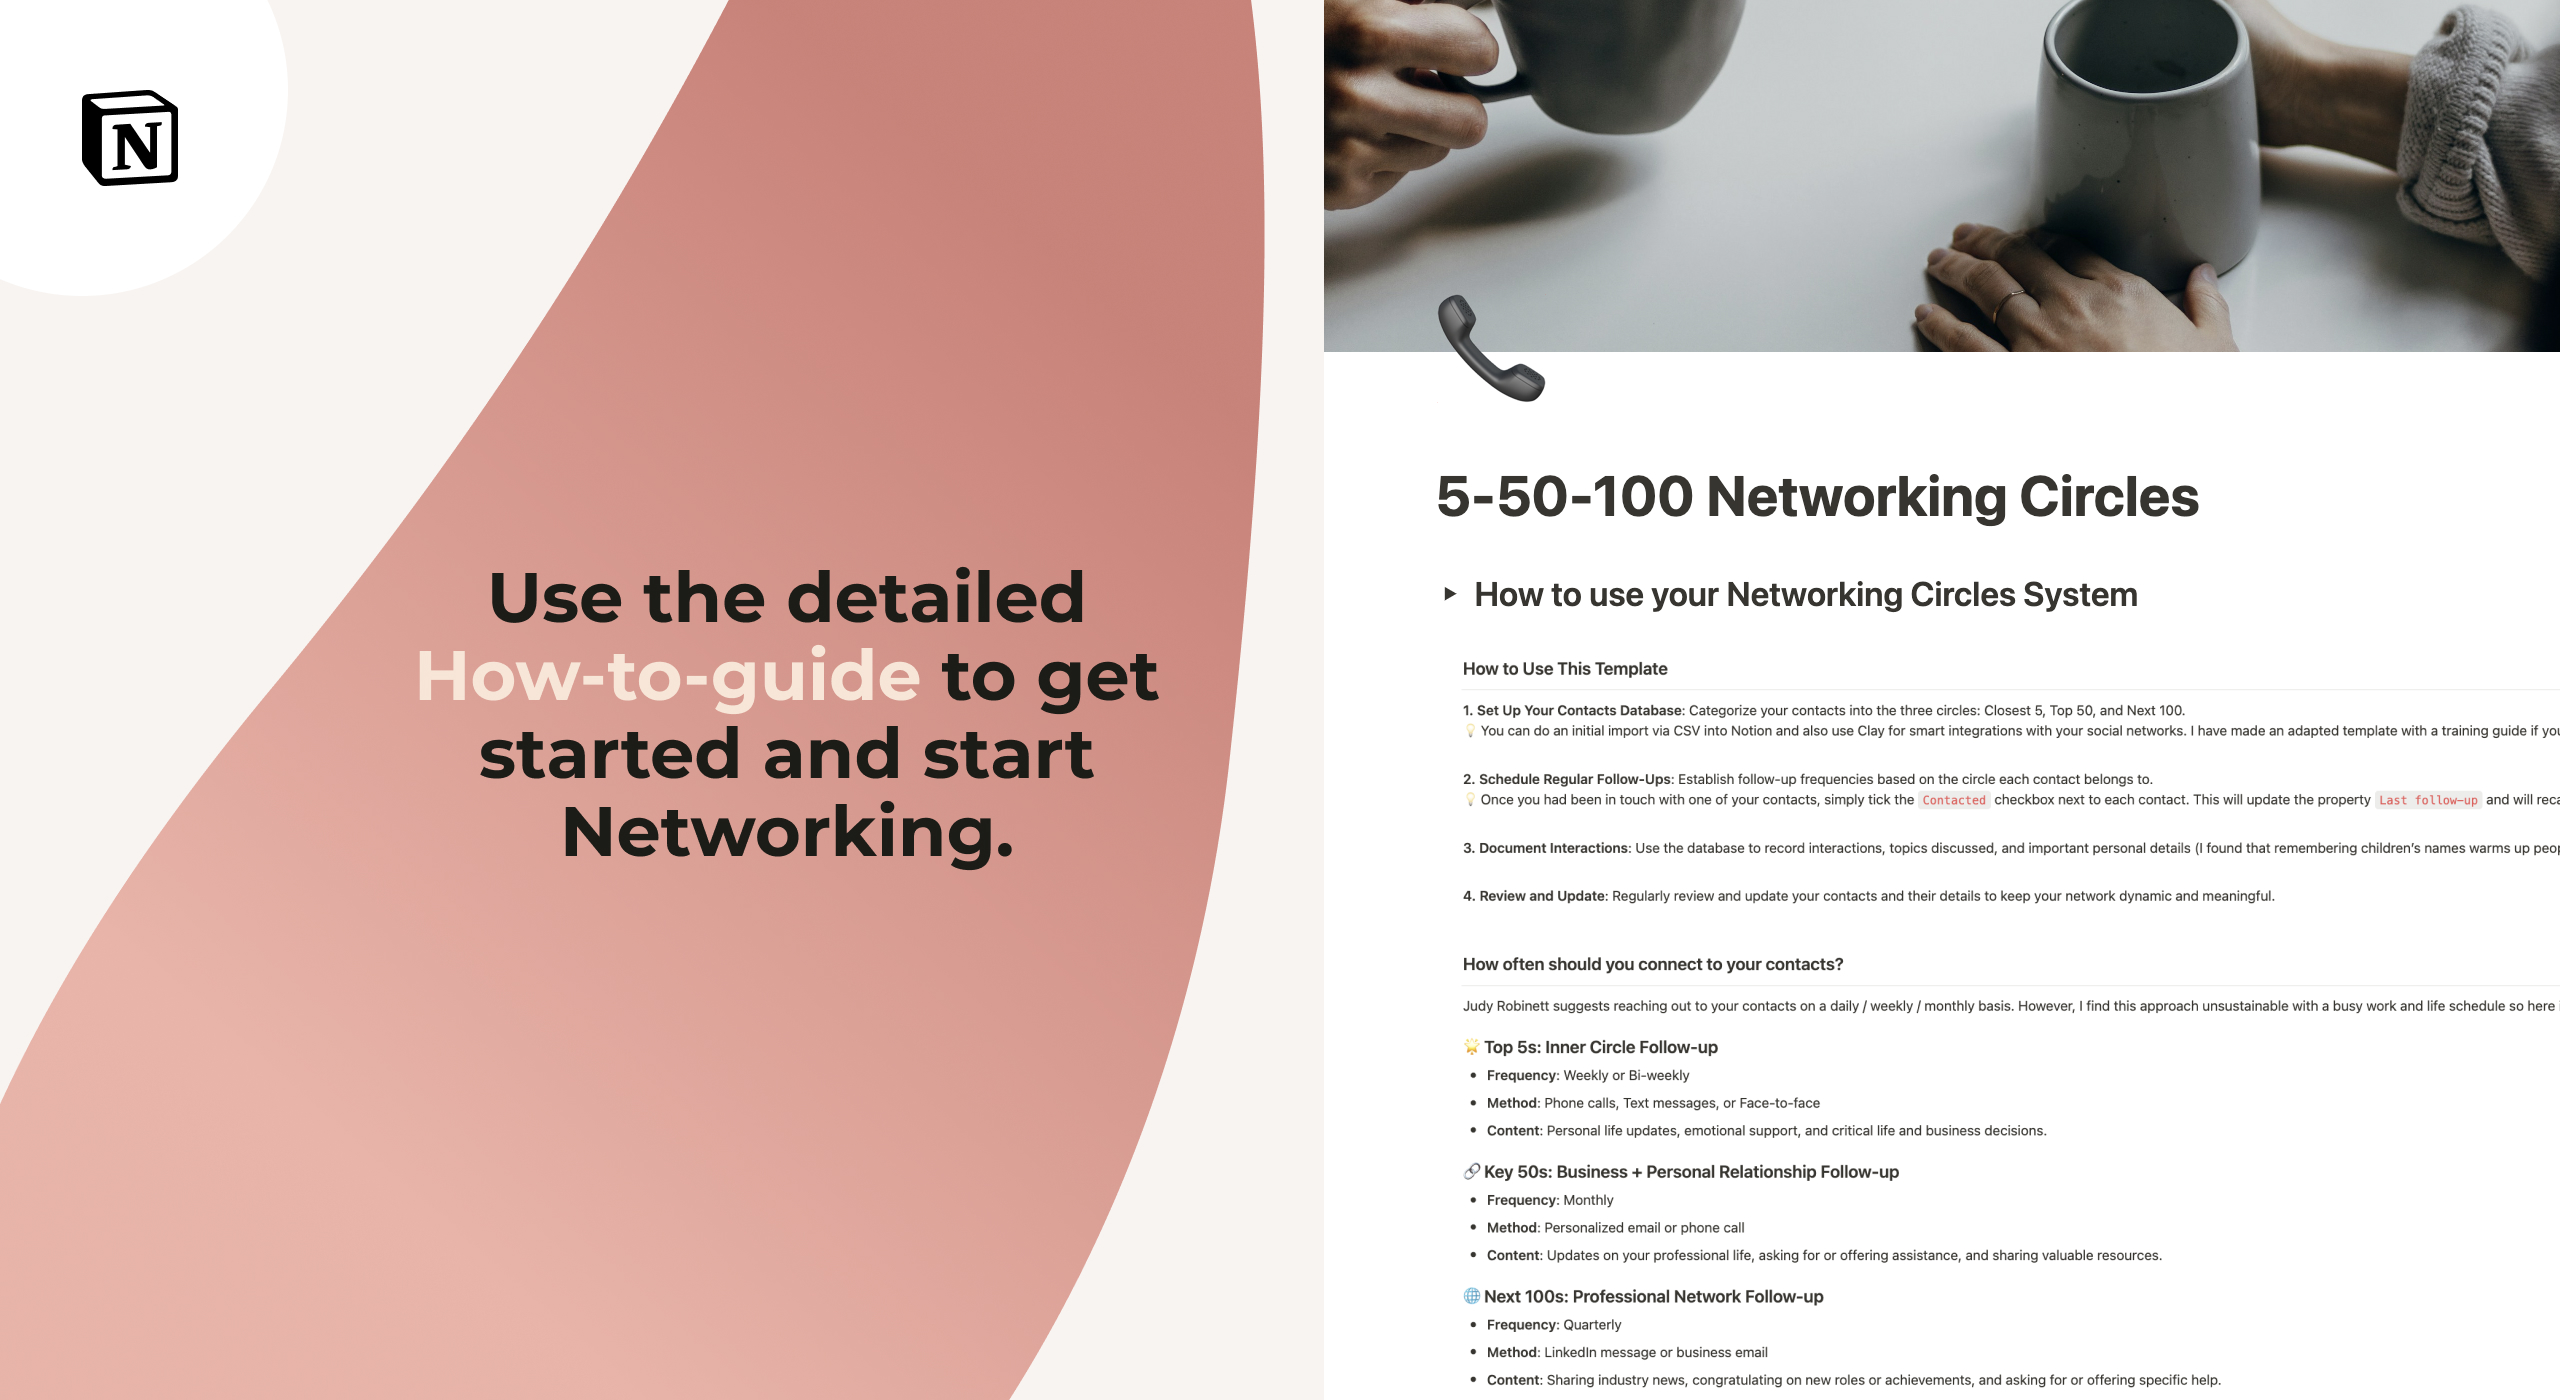 Optimize your networking with the 5-50-100 Networking Circles template. Categorize contacts into three circles: Top 5 (weekly), Key 50 (monthly), and Next 100 (quarterly). Stay connected, remember important details, and nurture meaningful relationships efficiently.